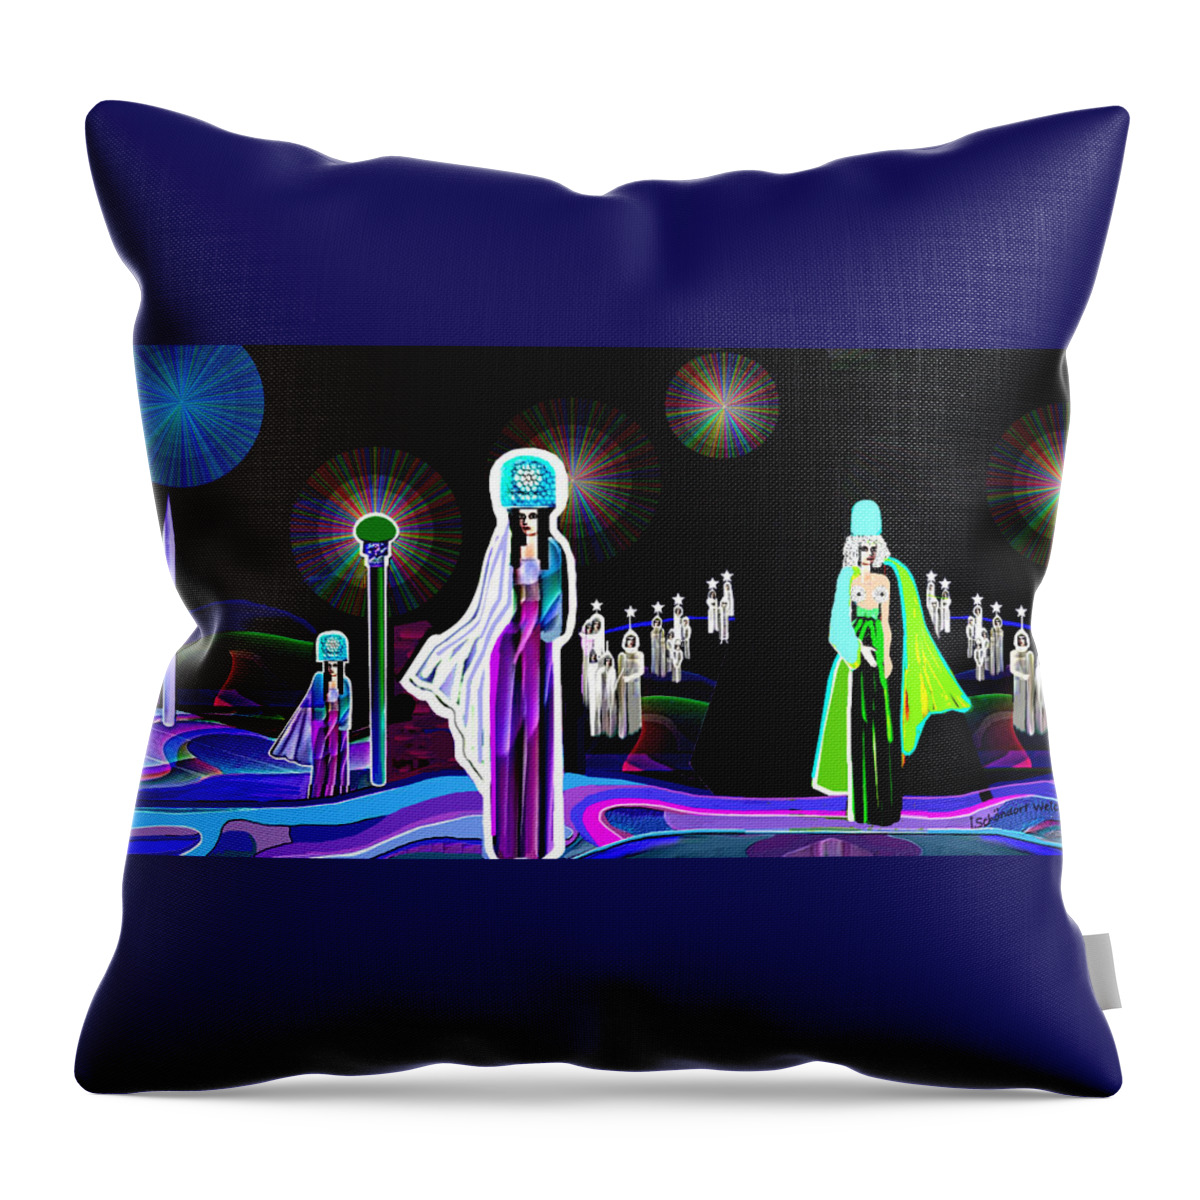 2942 Night In Fairy Land 2018 Throw Pillow featuring the digital art 2942 Night In Fairy Land  by Irmgard Schoendorf Welch